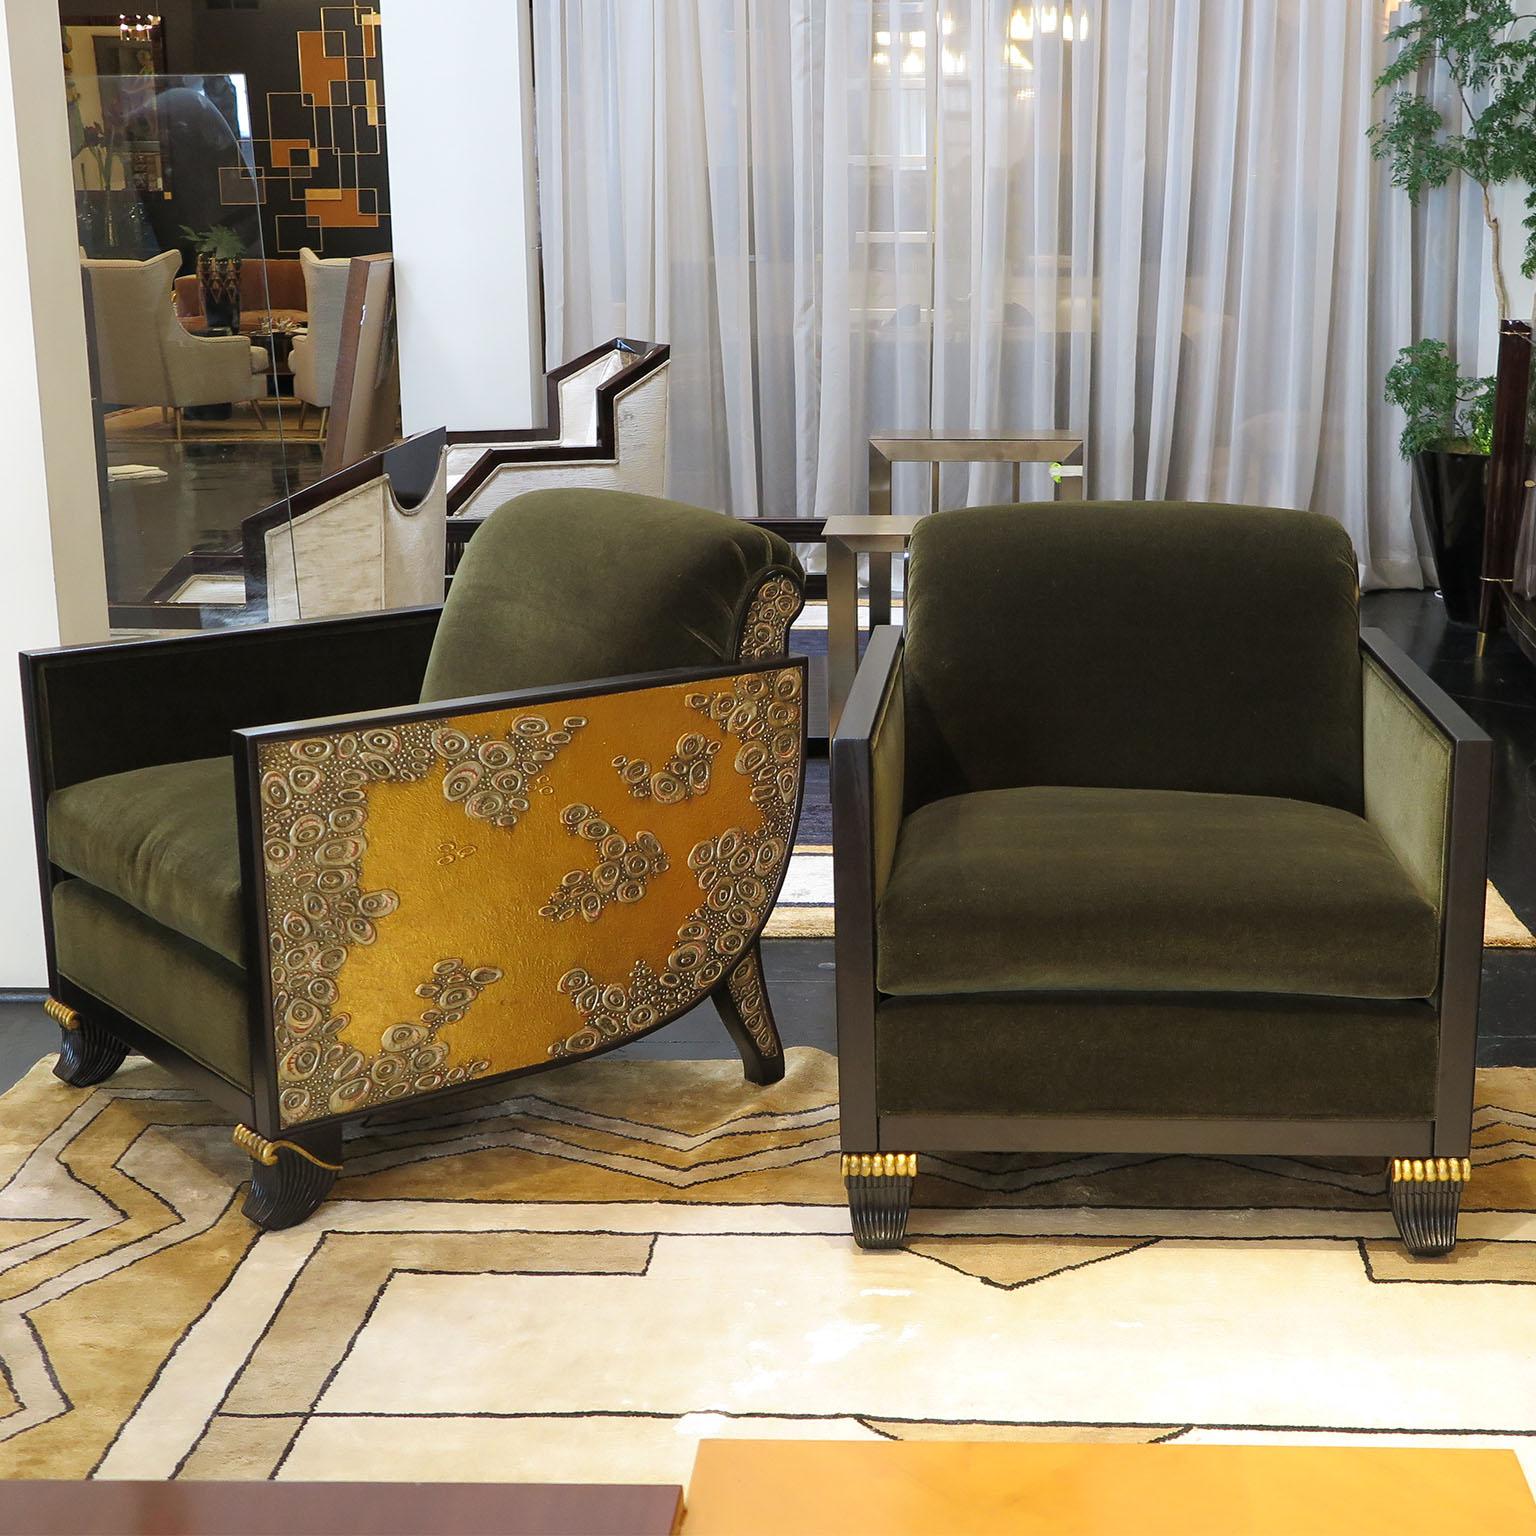 Pair of lounge chairs from Milan 1980s inspired by Jacques Emile Ruhlmann chairs with an added twist of carved relief arms in gold leaf reminiscent of a Gustav Klimt painting.
The thin wooden arms are in a dark brown stained Mahogany in a matte